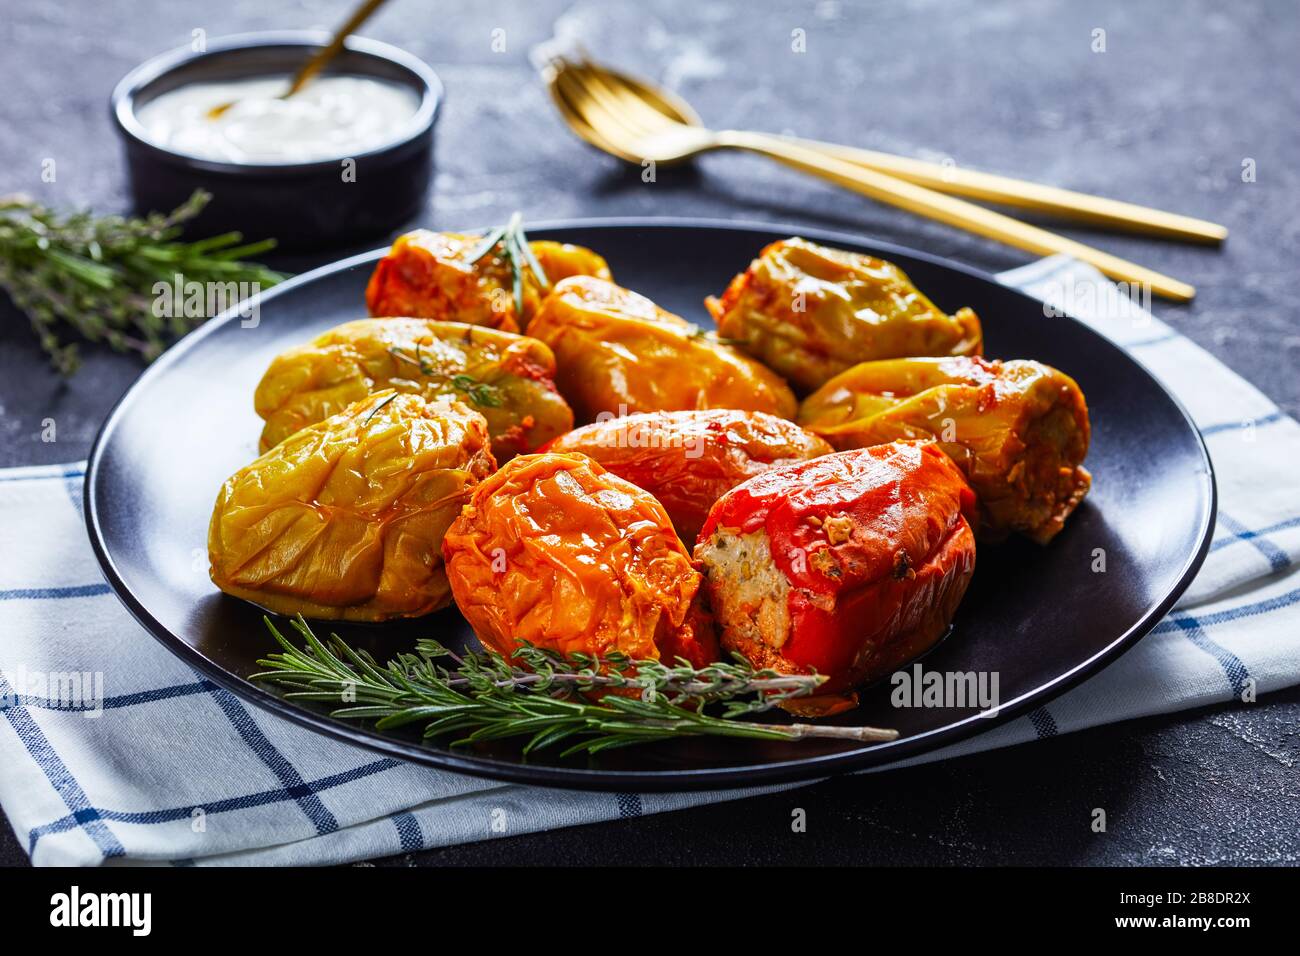 Classic stuffed bell peppers with rice, ground beef, and pork in tomato sauce, rosemary and thyme on a black plate with sour cream and gold cutlery, o Stock Photo